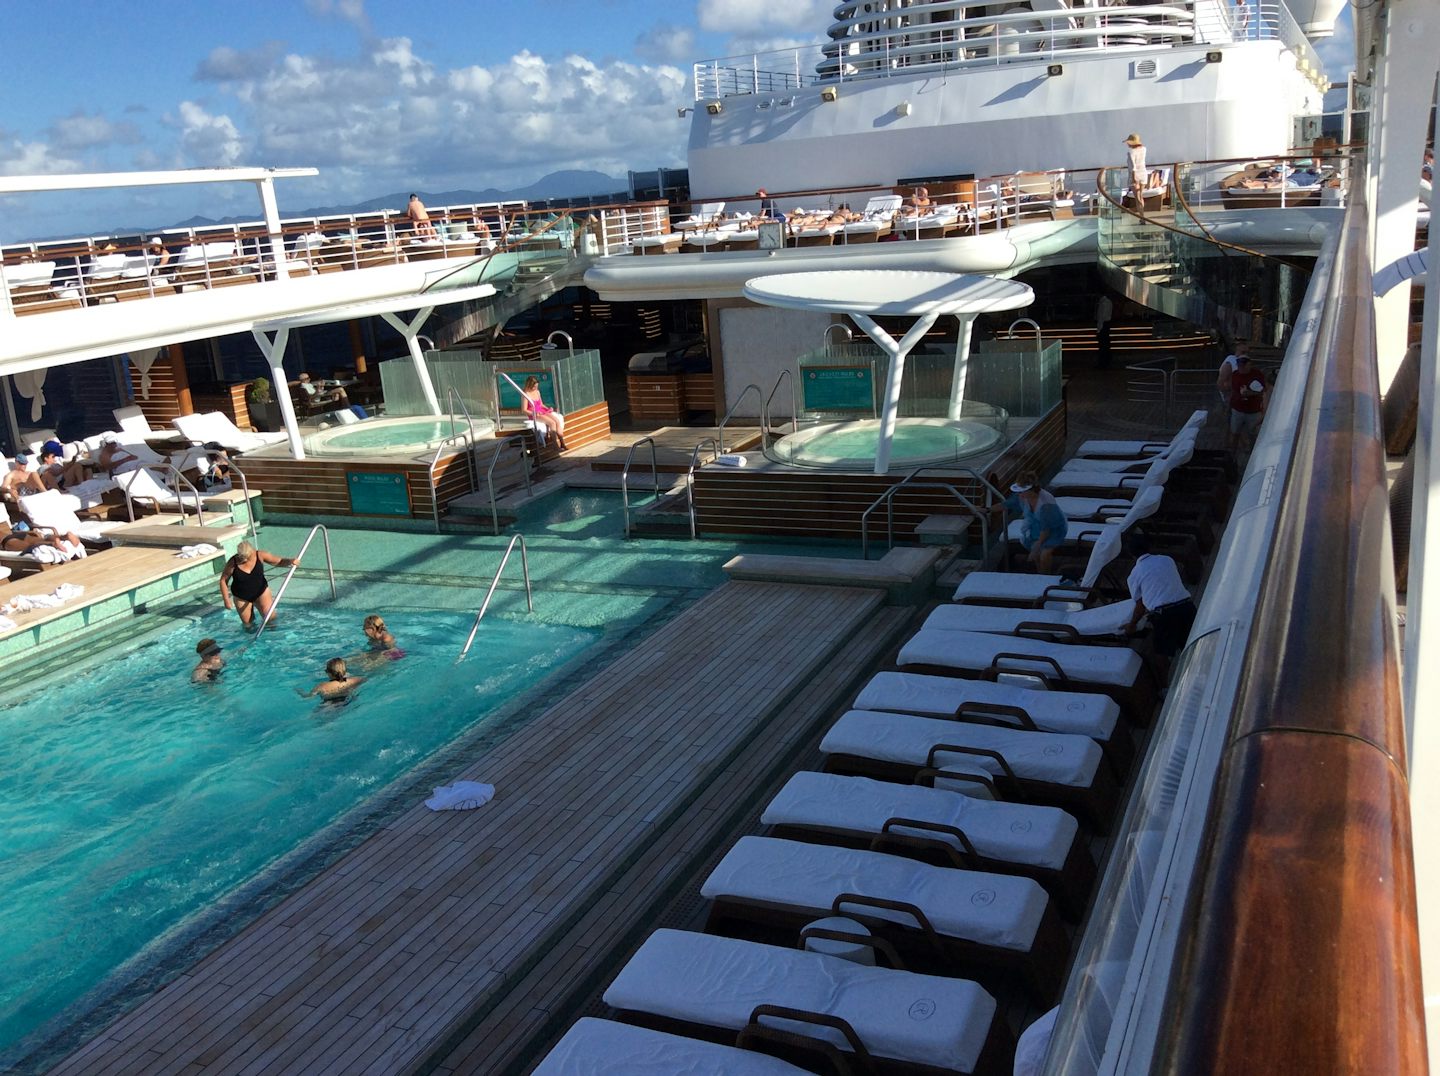 The biggest pool I have seen on a ship. The pool service was great, and the